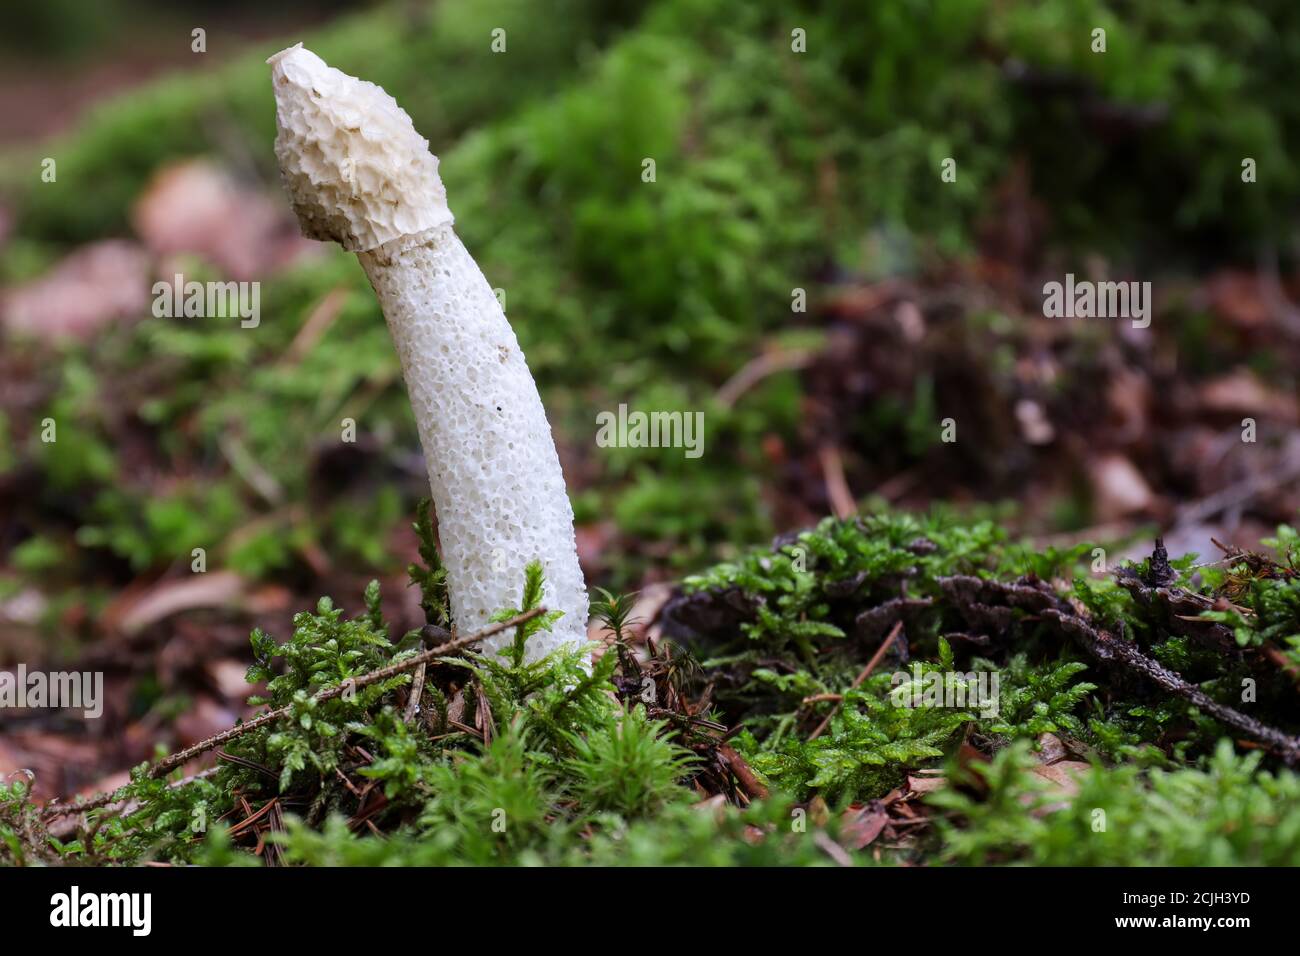 Phallus Impudicus - common stinkhorn - mushroom is not poisonous, but only very fresh mushrooms are consumed Stock Photo